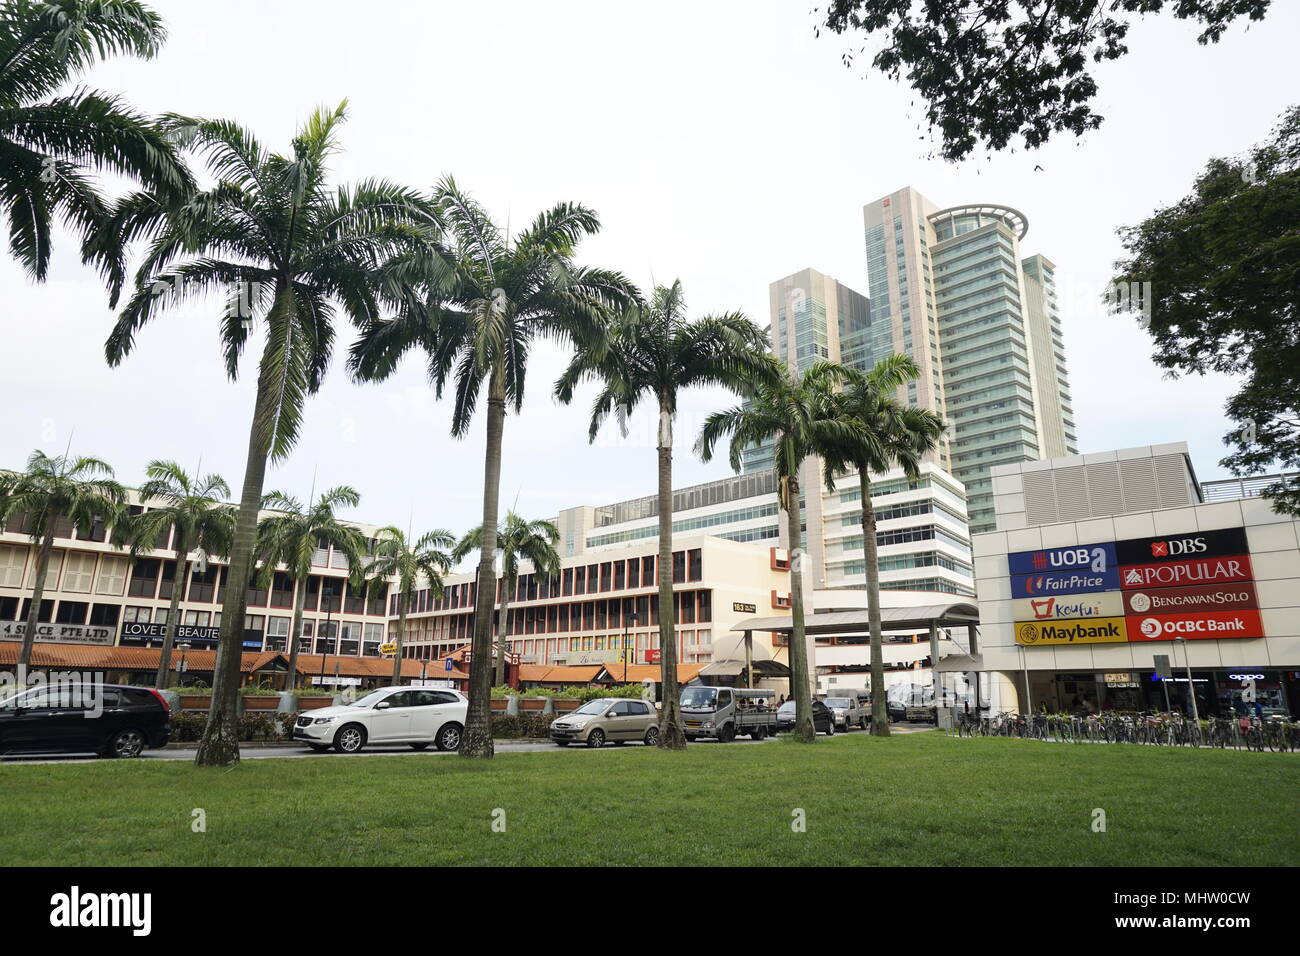 Toa Payoh mall, Singapore. Shophouses located within a matured residential area. Stock Photo